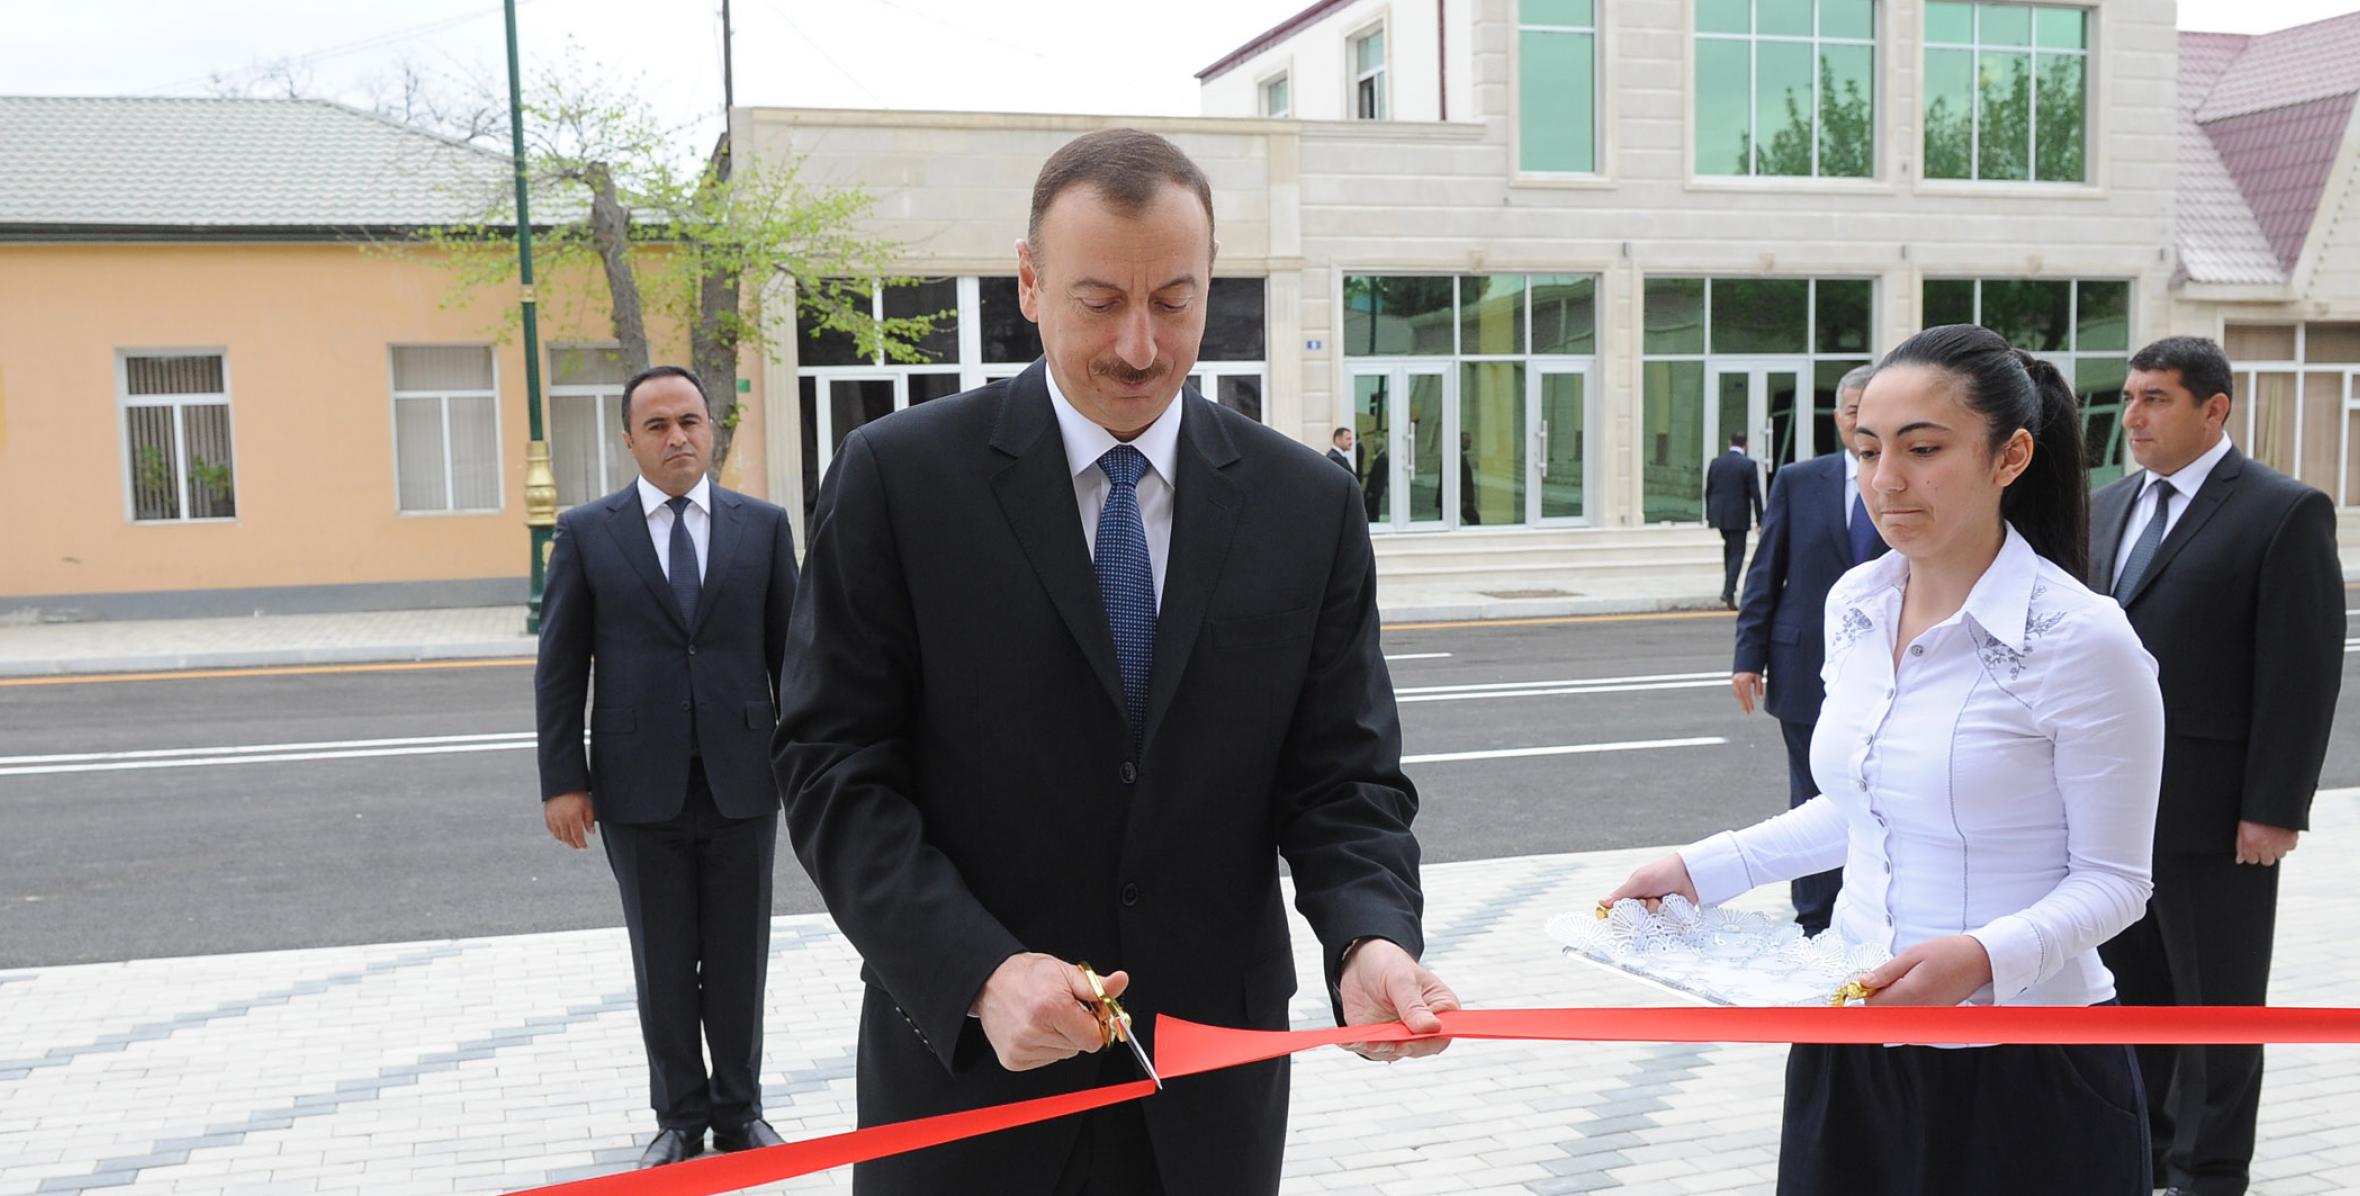 Ilham Aliyev attended the opening of a new office building of the Agstafa district branch of the New Azerbaijan Party